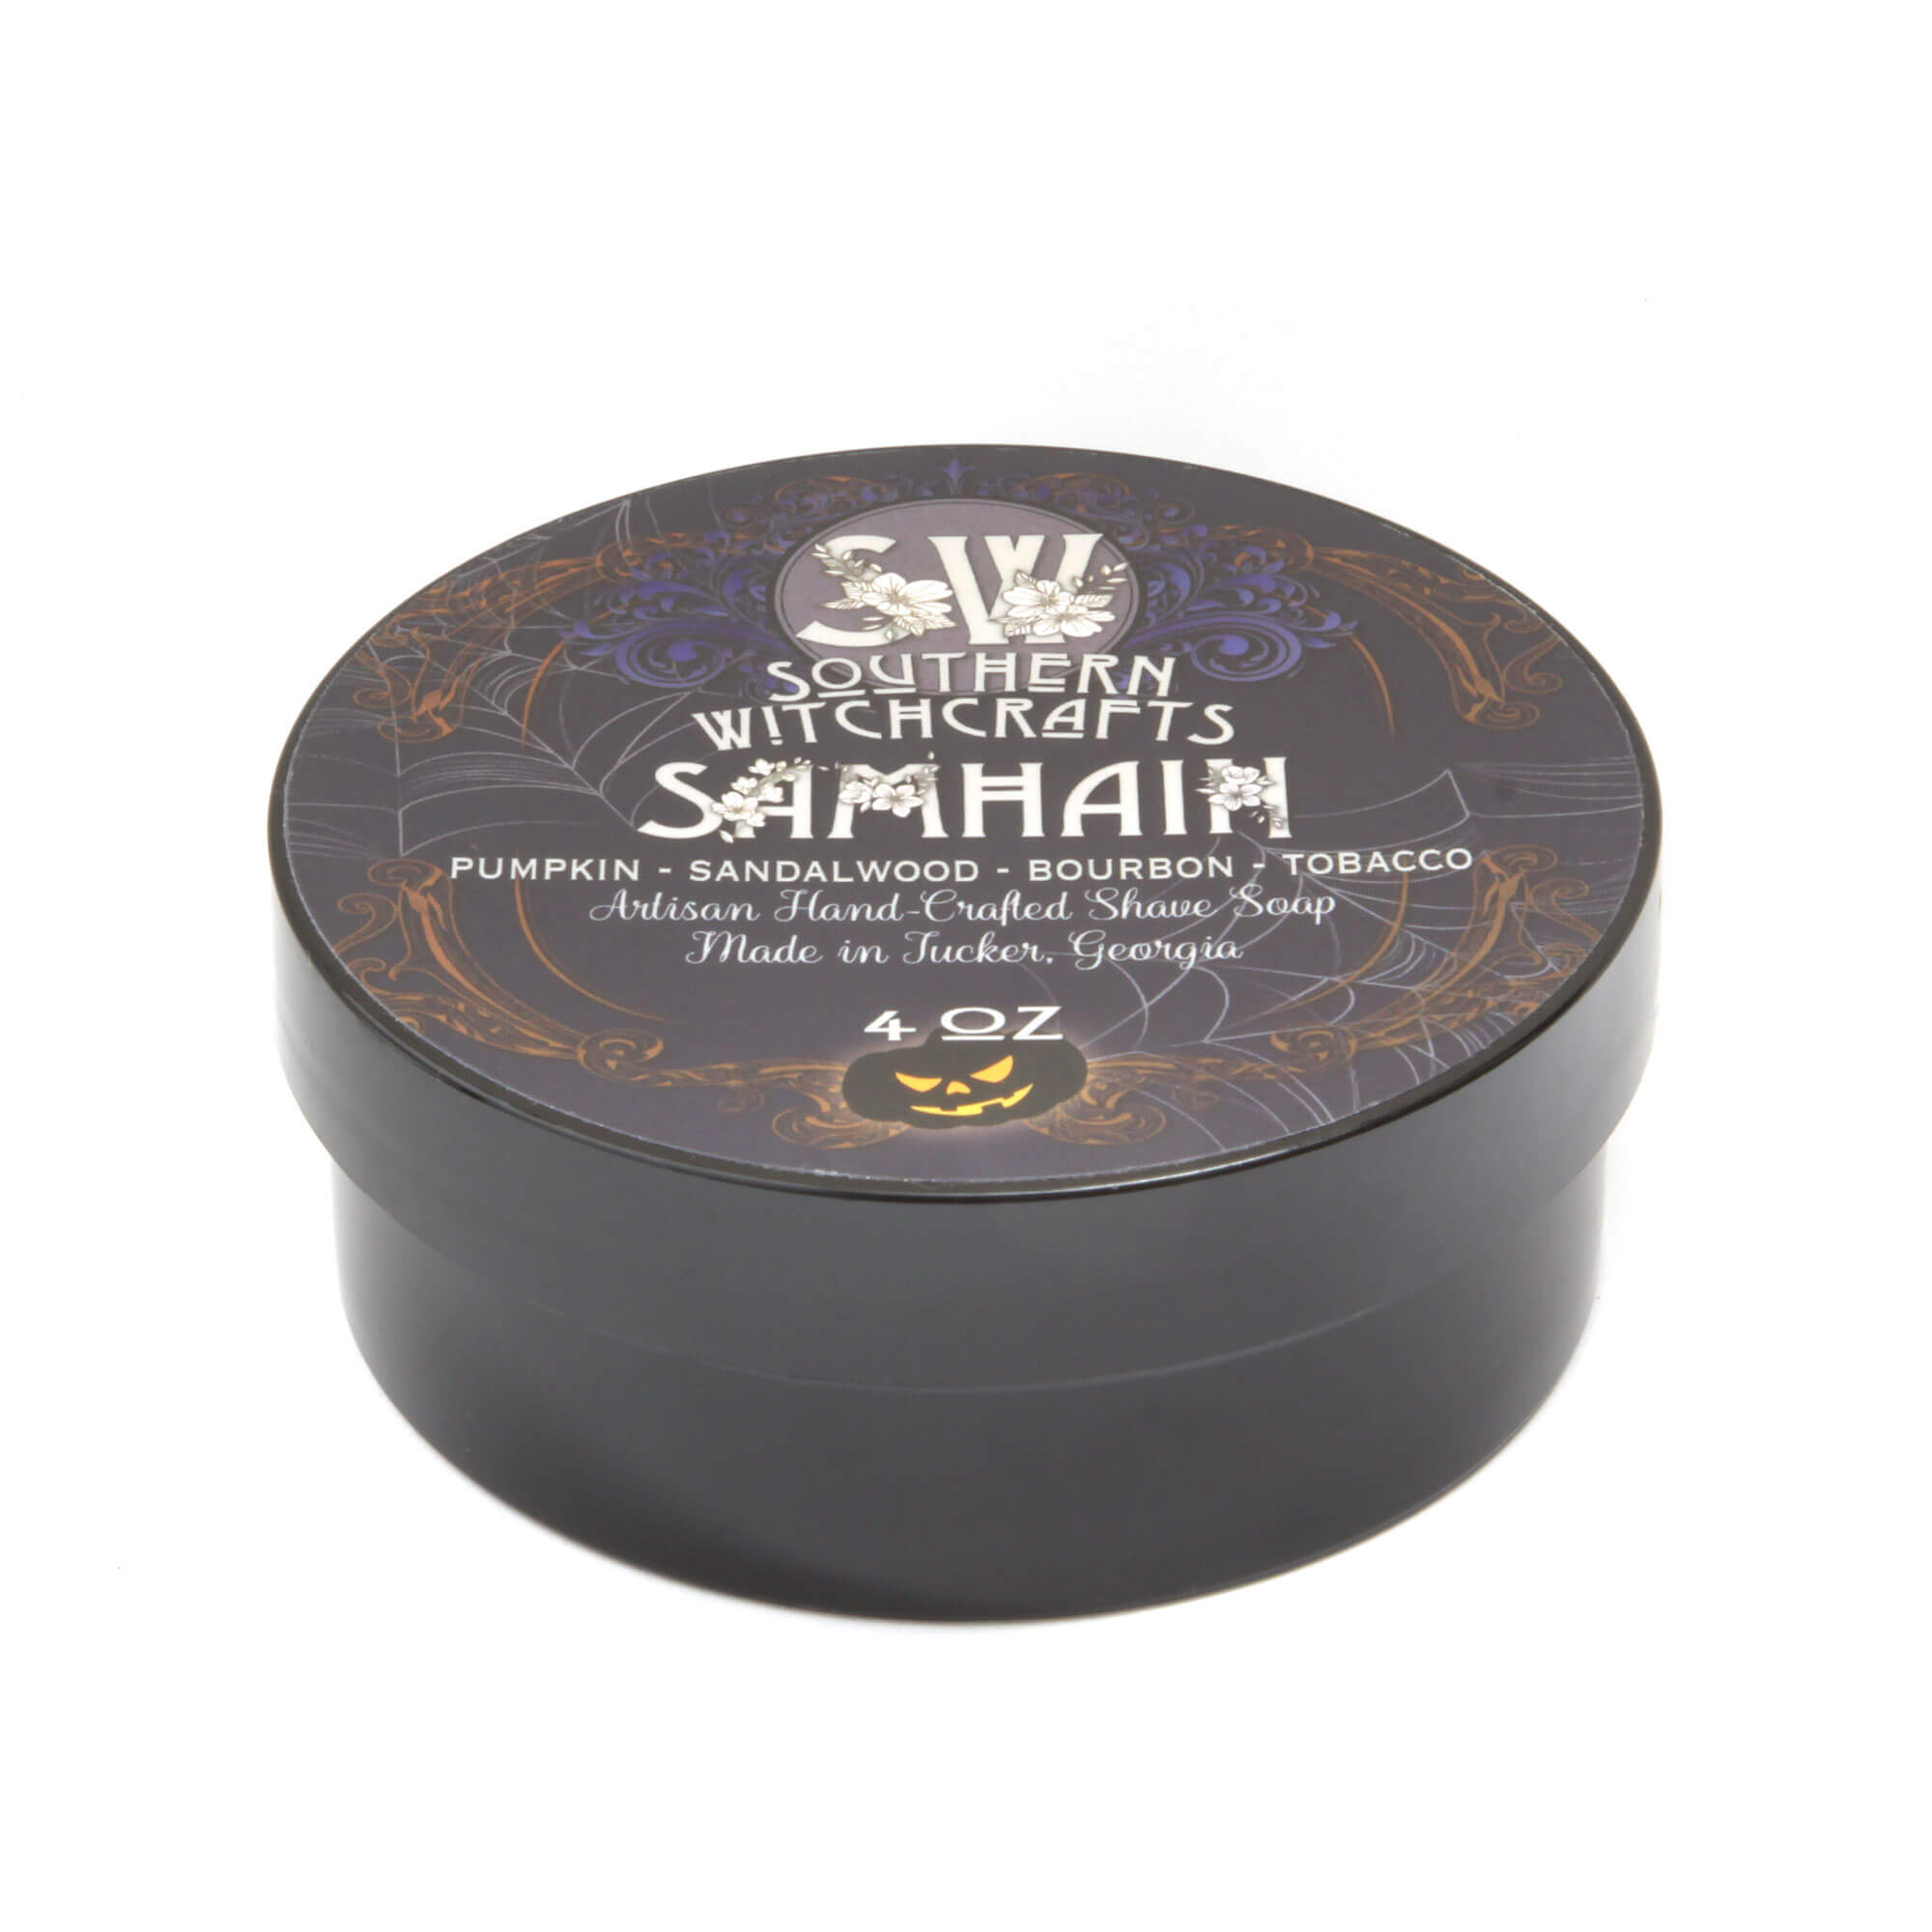 Southern Witchcrafts Samhain Shaving Soap